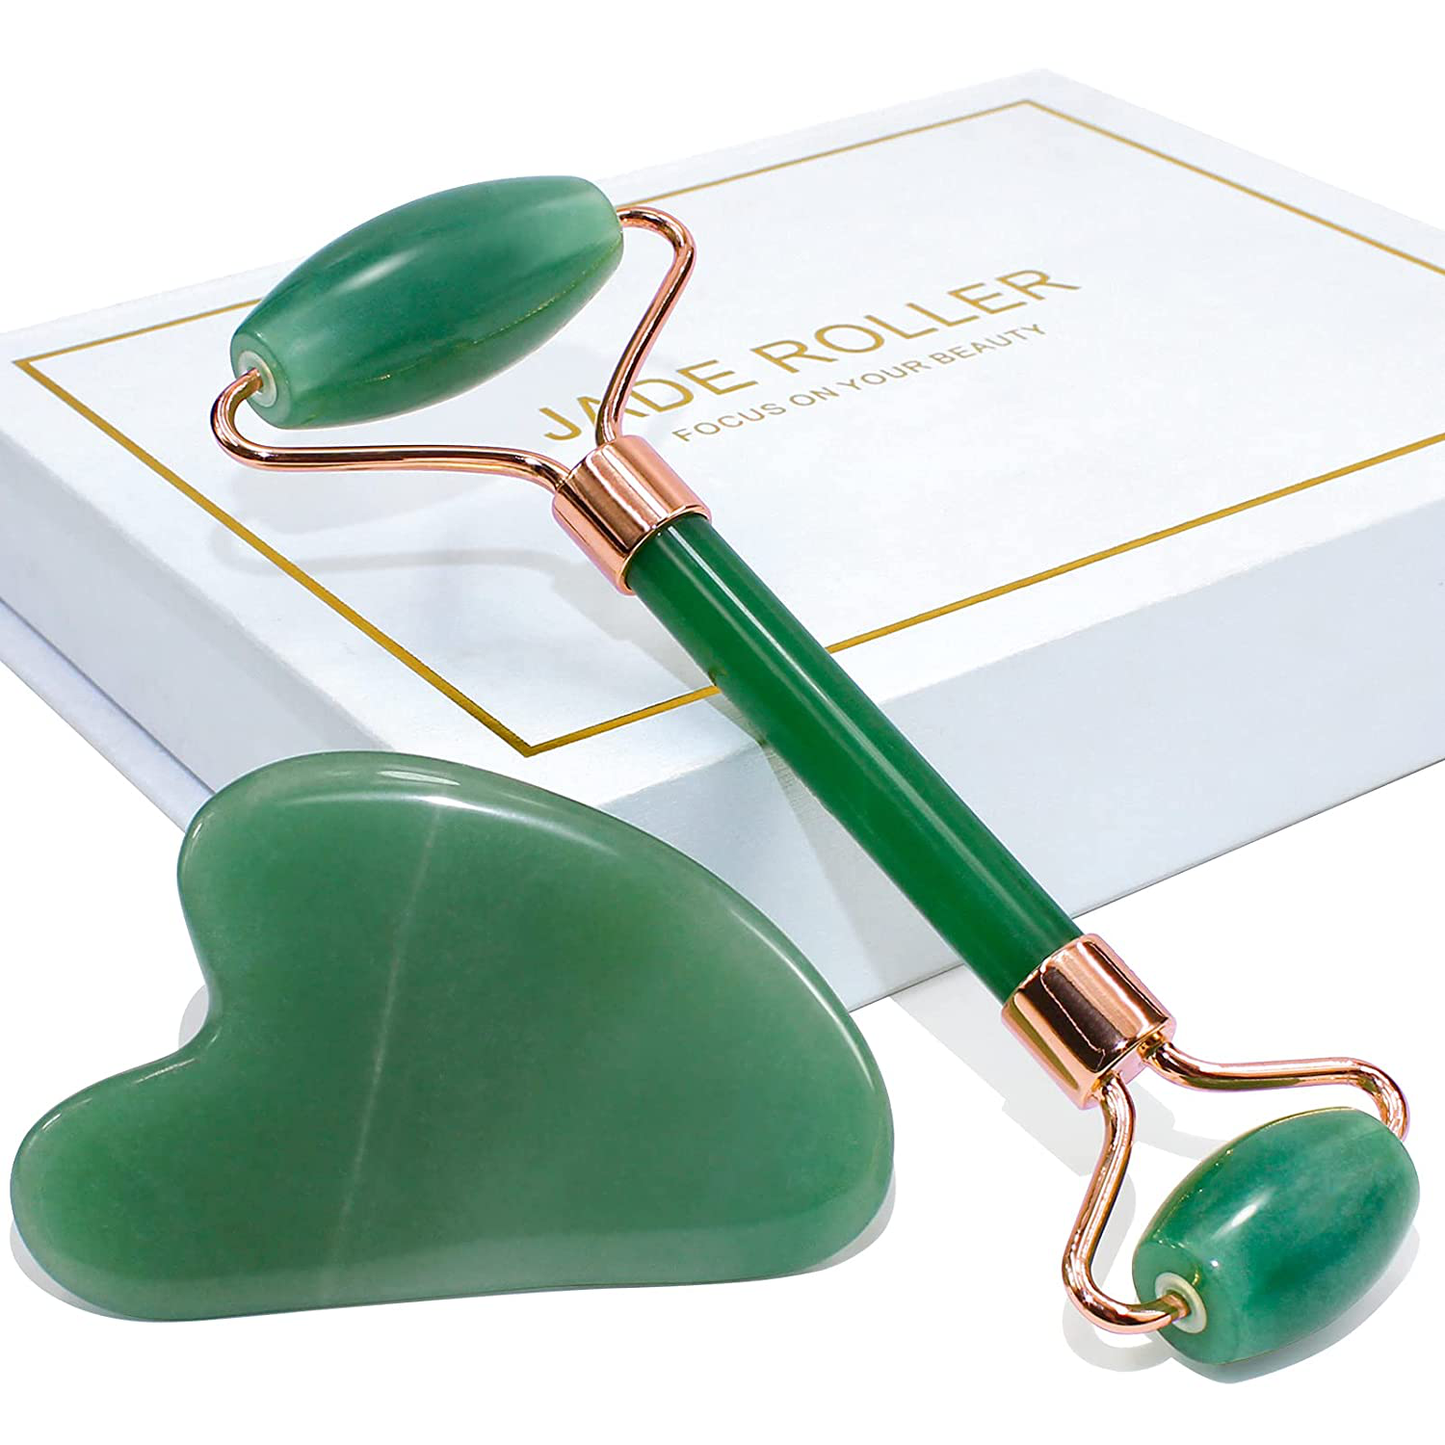 BAIMEI Jade Roller & Gua Sha Set - Face Roller Massage Tool, Green Aventurine Applicator for Face, Neck and Body Muscle - Relaxing, Relieve Fine Lines & Wrinkles